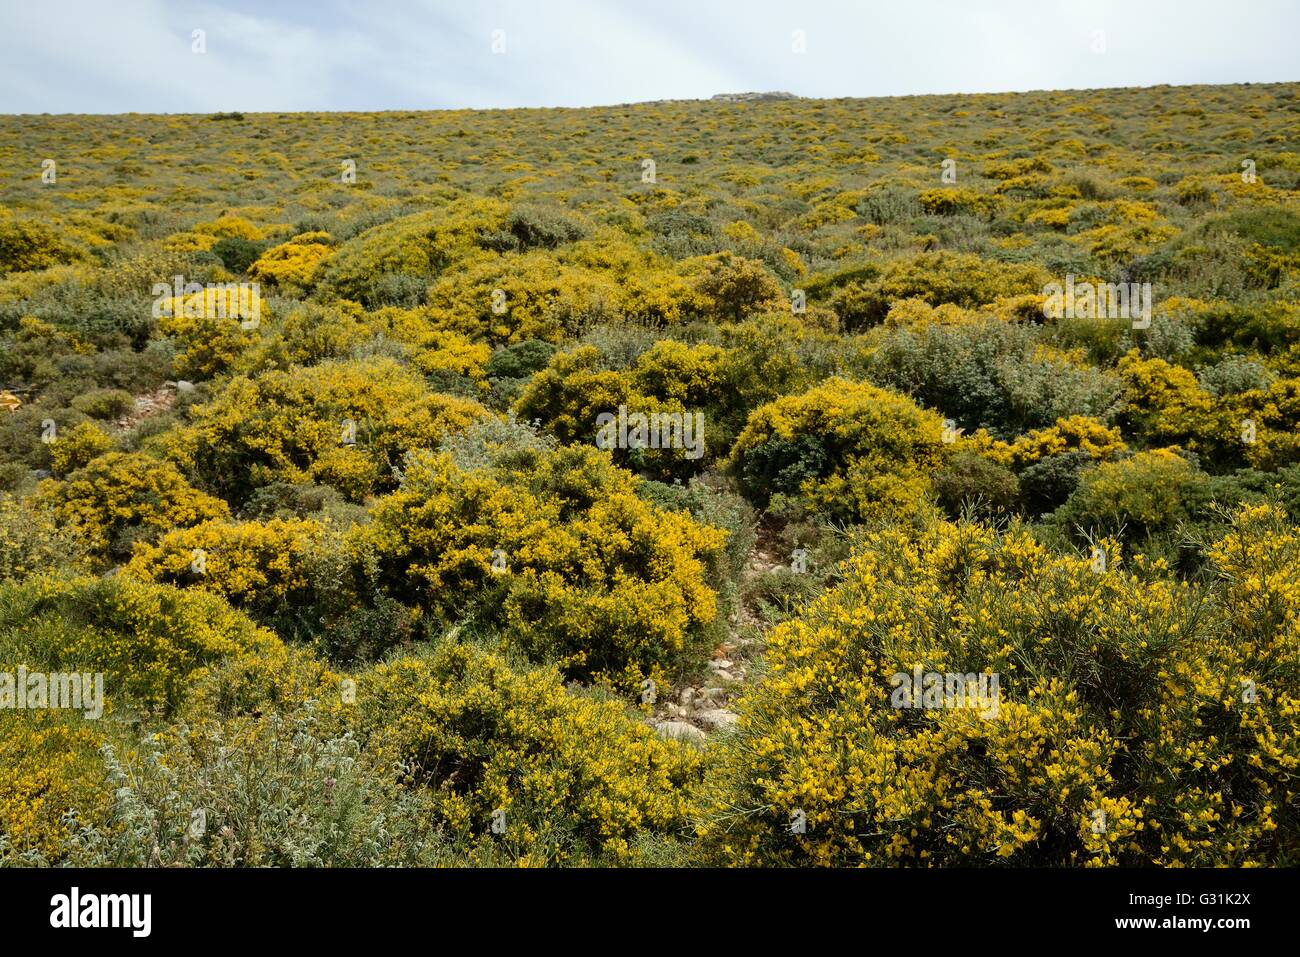 Montane phrygana / garrigue scrubland dominated by clumps of low growing Broom (Genista acanthoclada) in full flower, Crete. Stock Photo